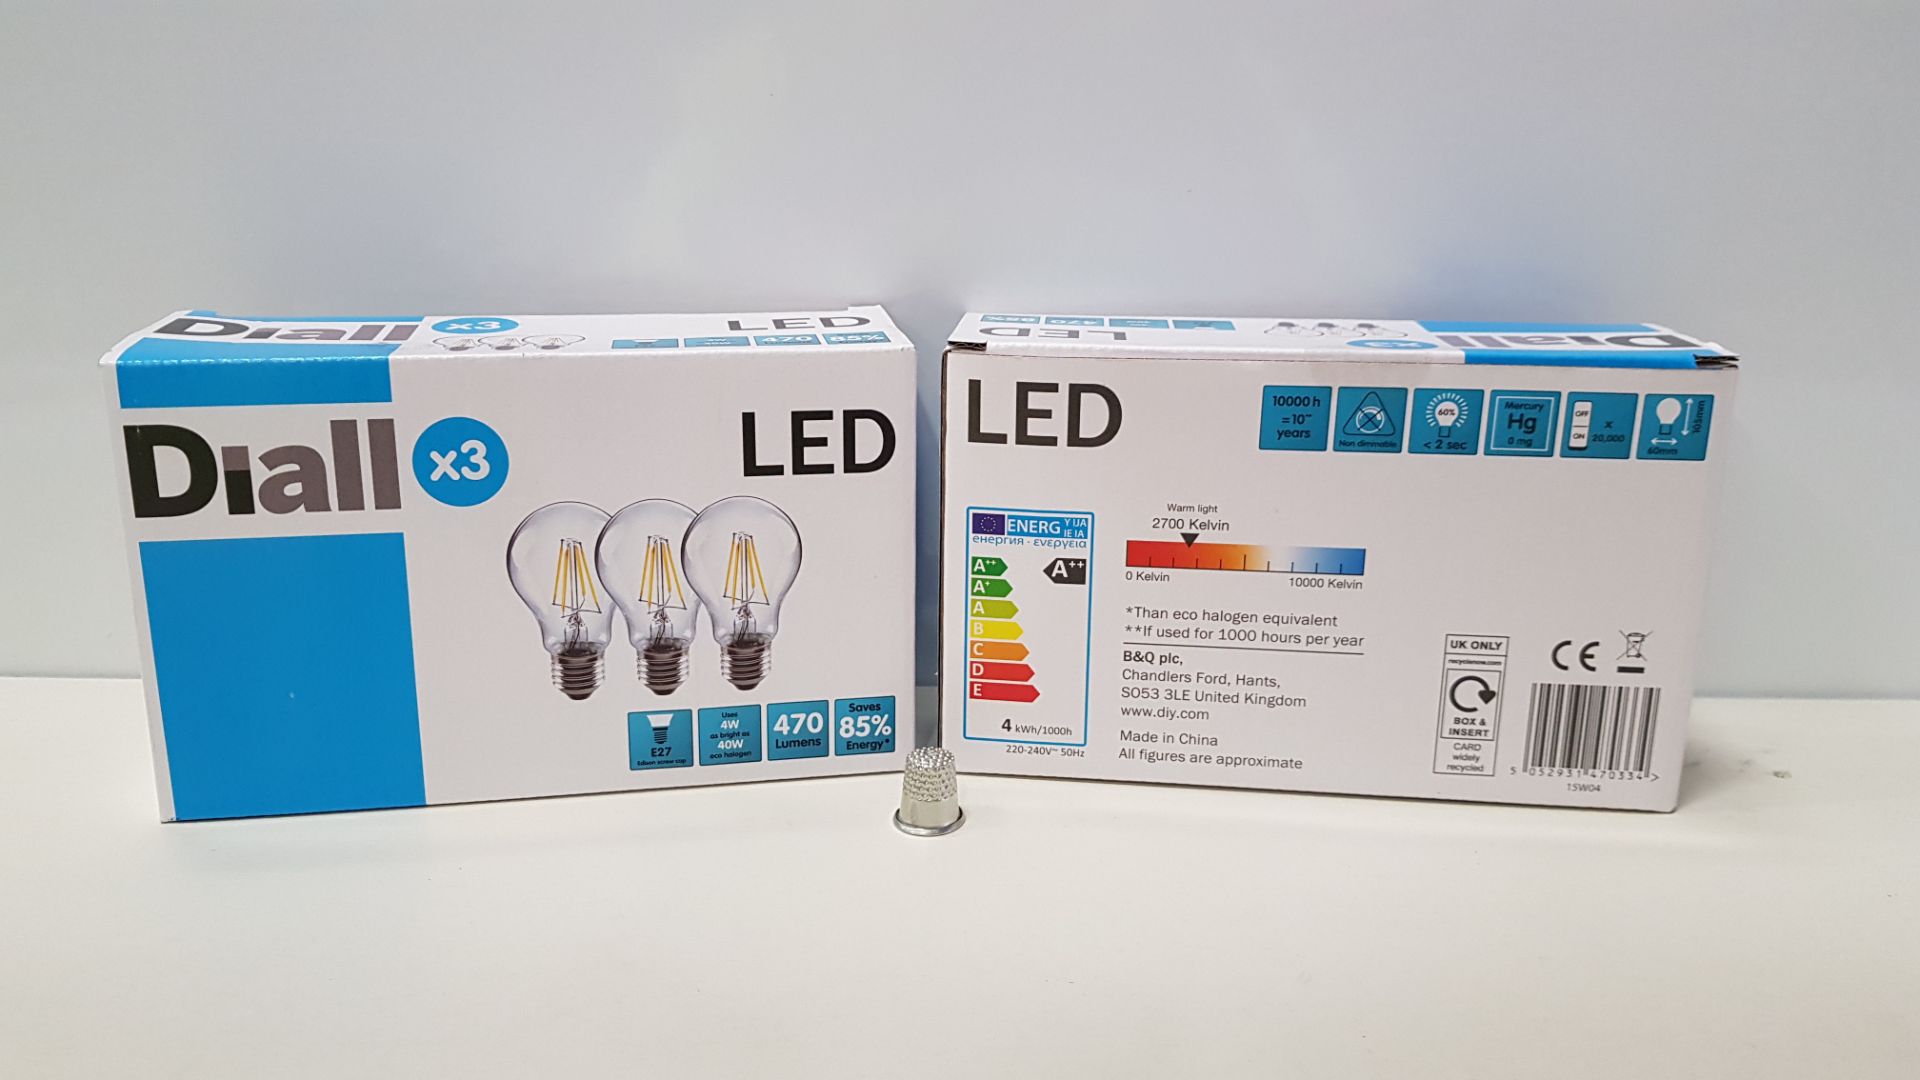 48 X BRAND NEW DIALL PACK OF 3 LED BULBS WITH EDISON SCREW CAP (470 LUMENS) - IN 3 BOXES